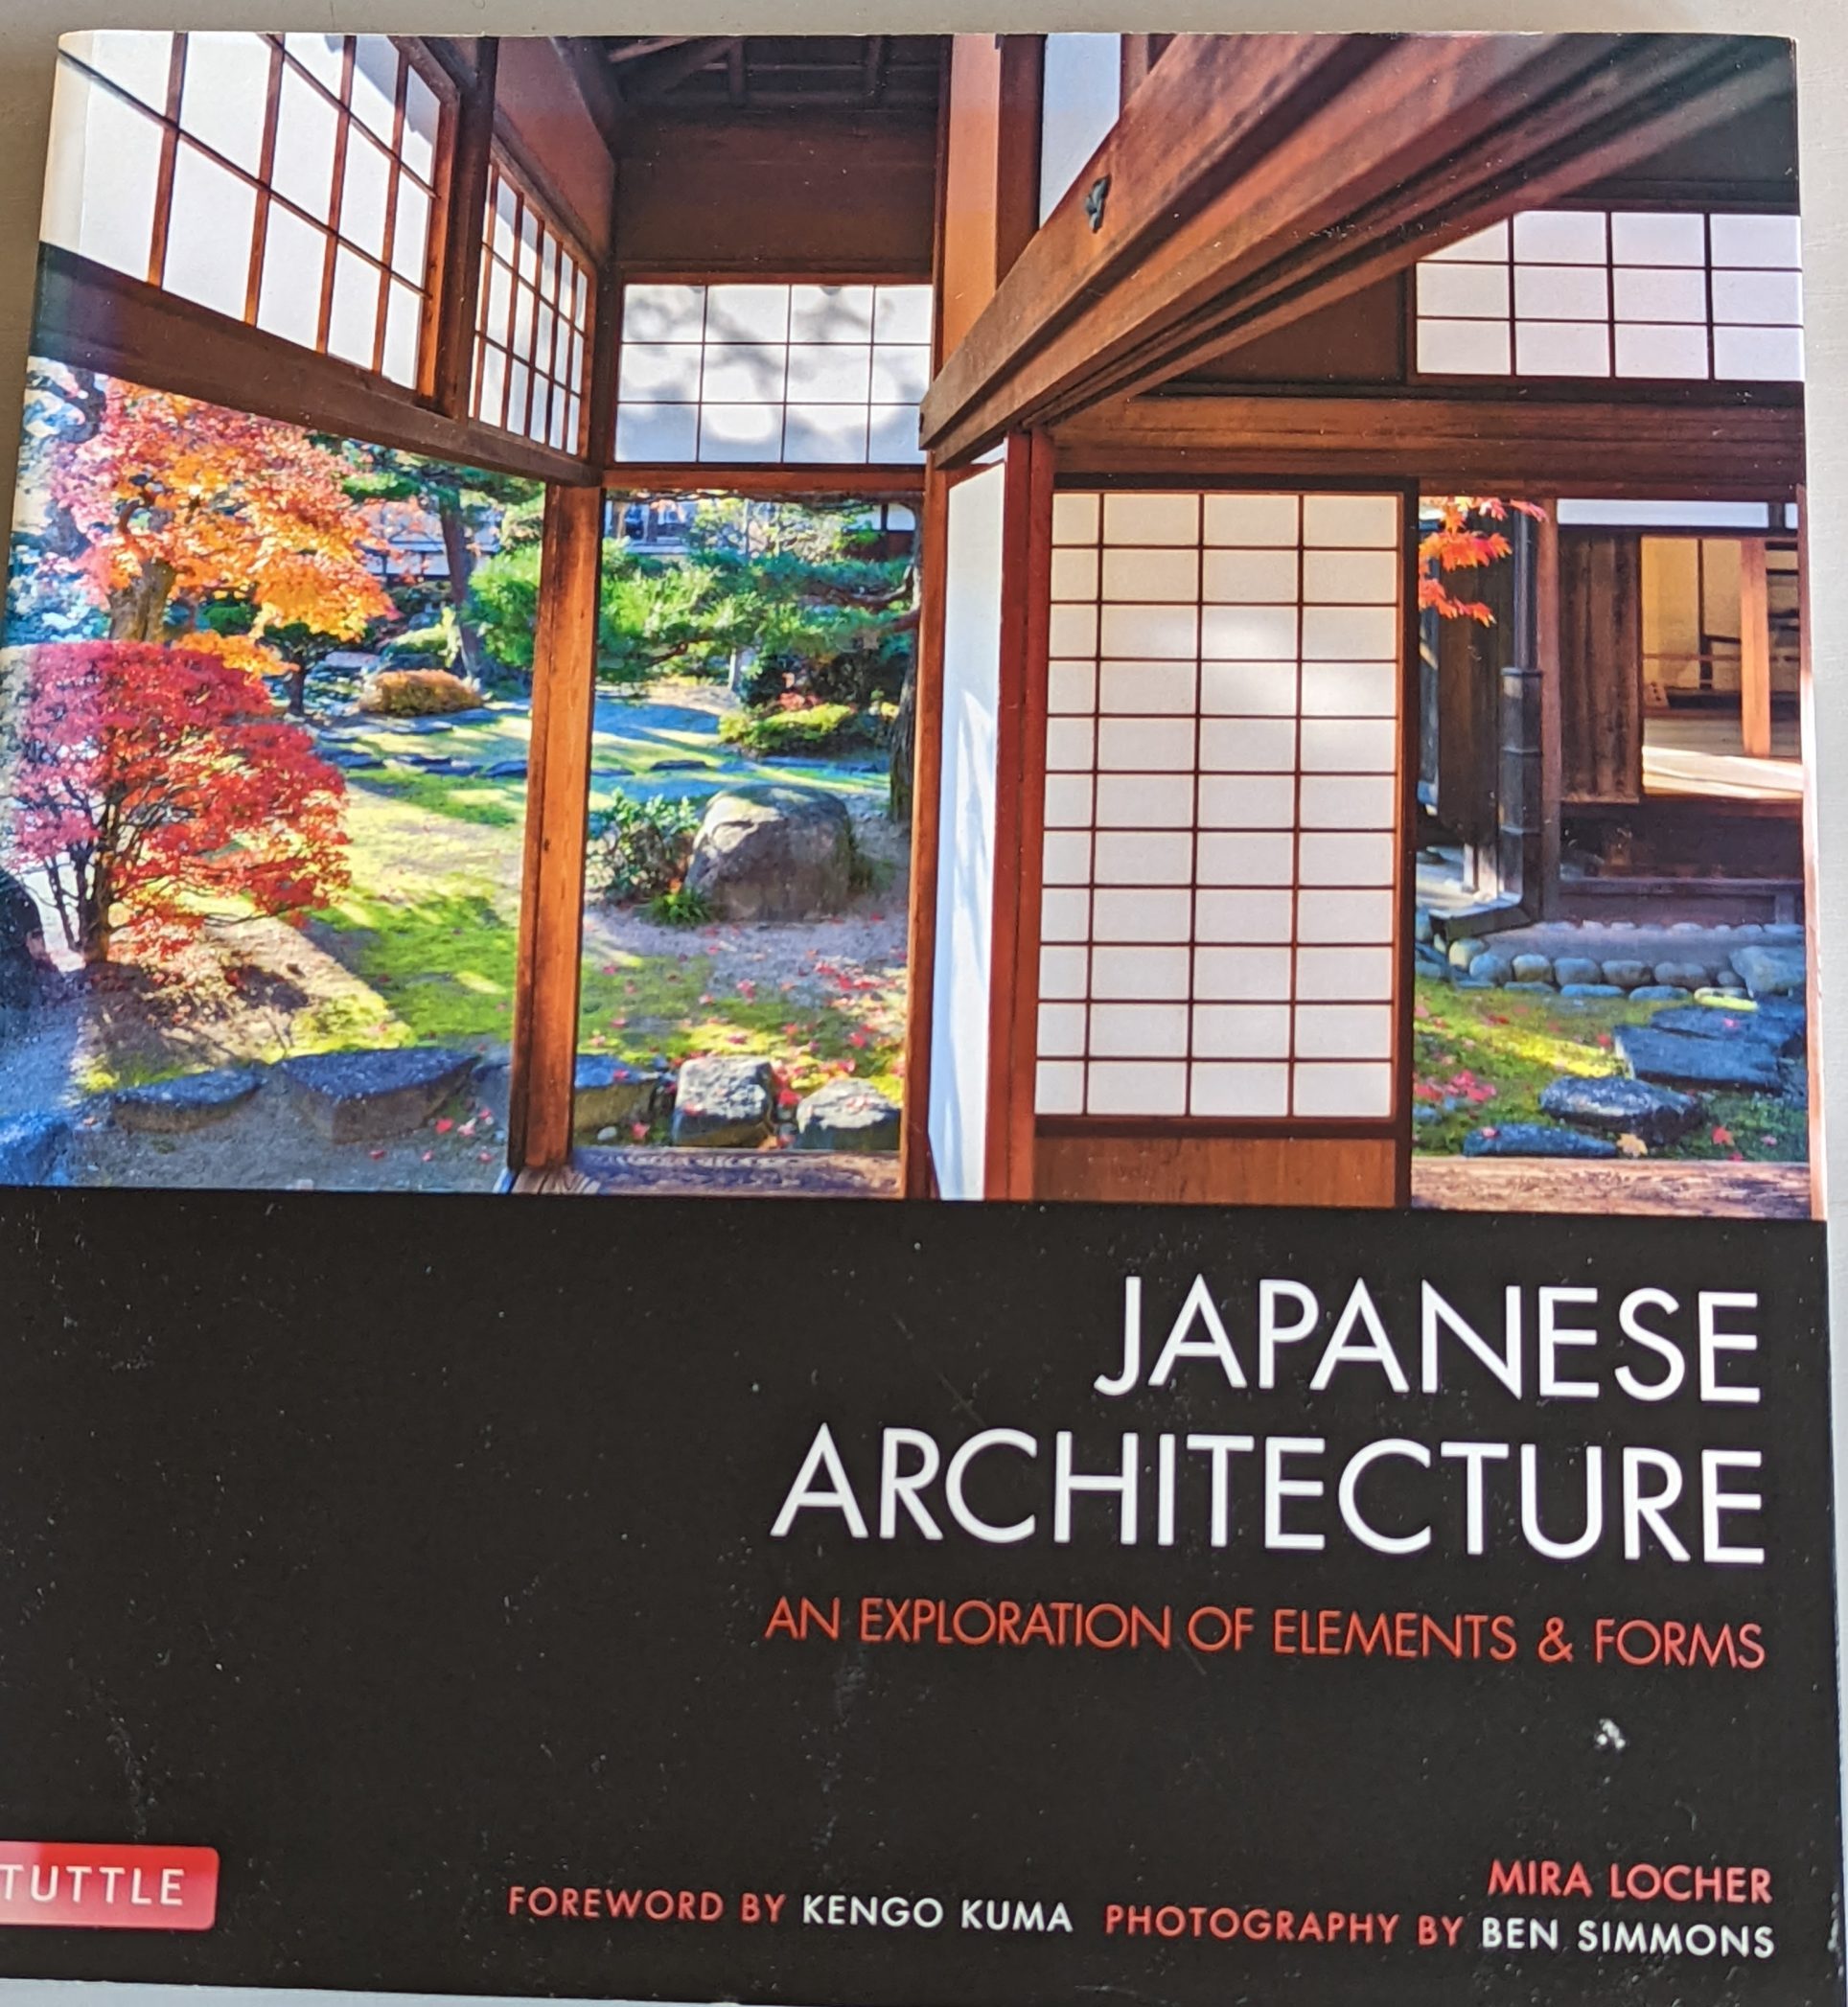 BOOK: Japanese Architecture – An Exploration of Elements and Forms